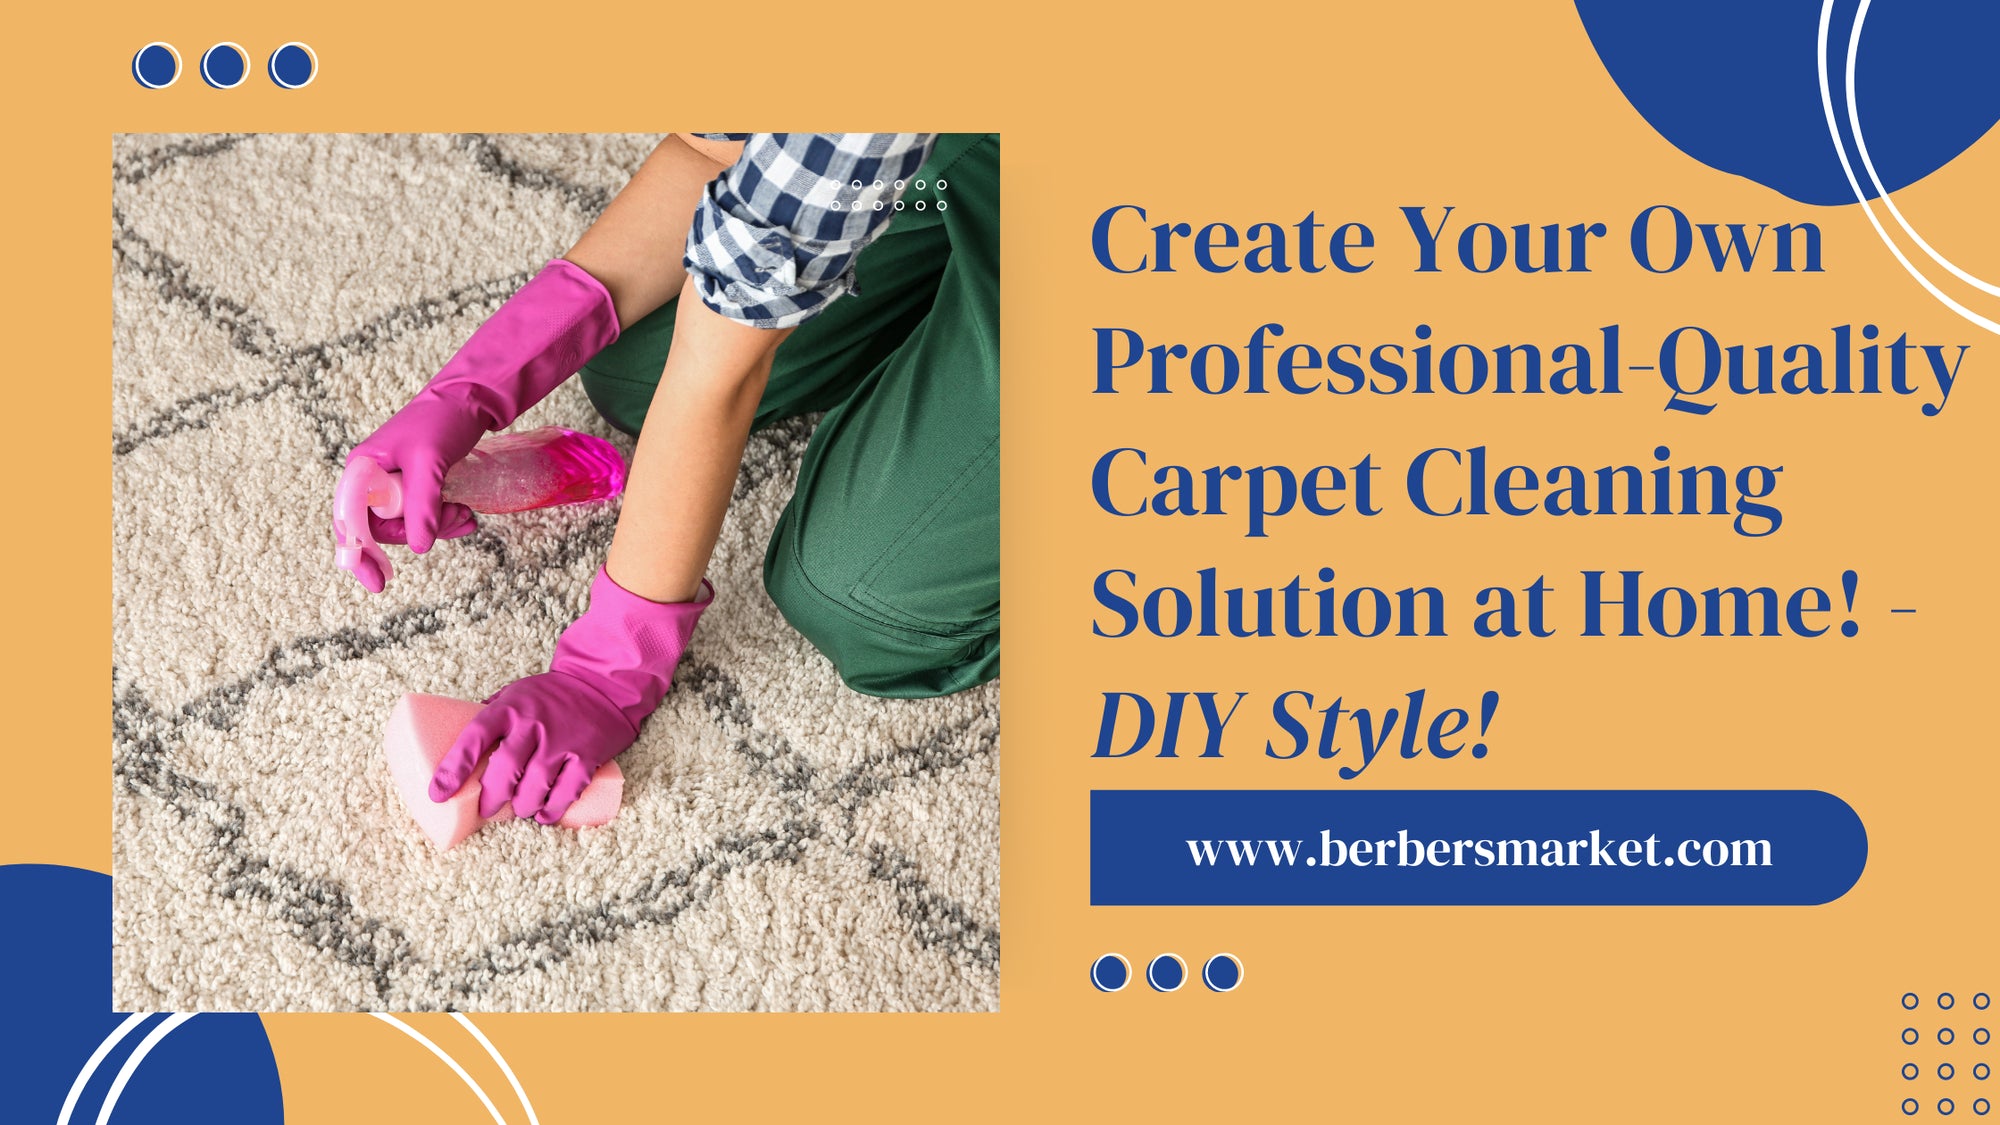 Blog banner for Create Your Own Professional-Quality Carpet Cleaning Solution at Home! - DIY Style 